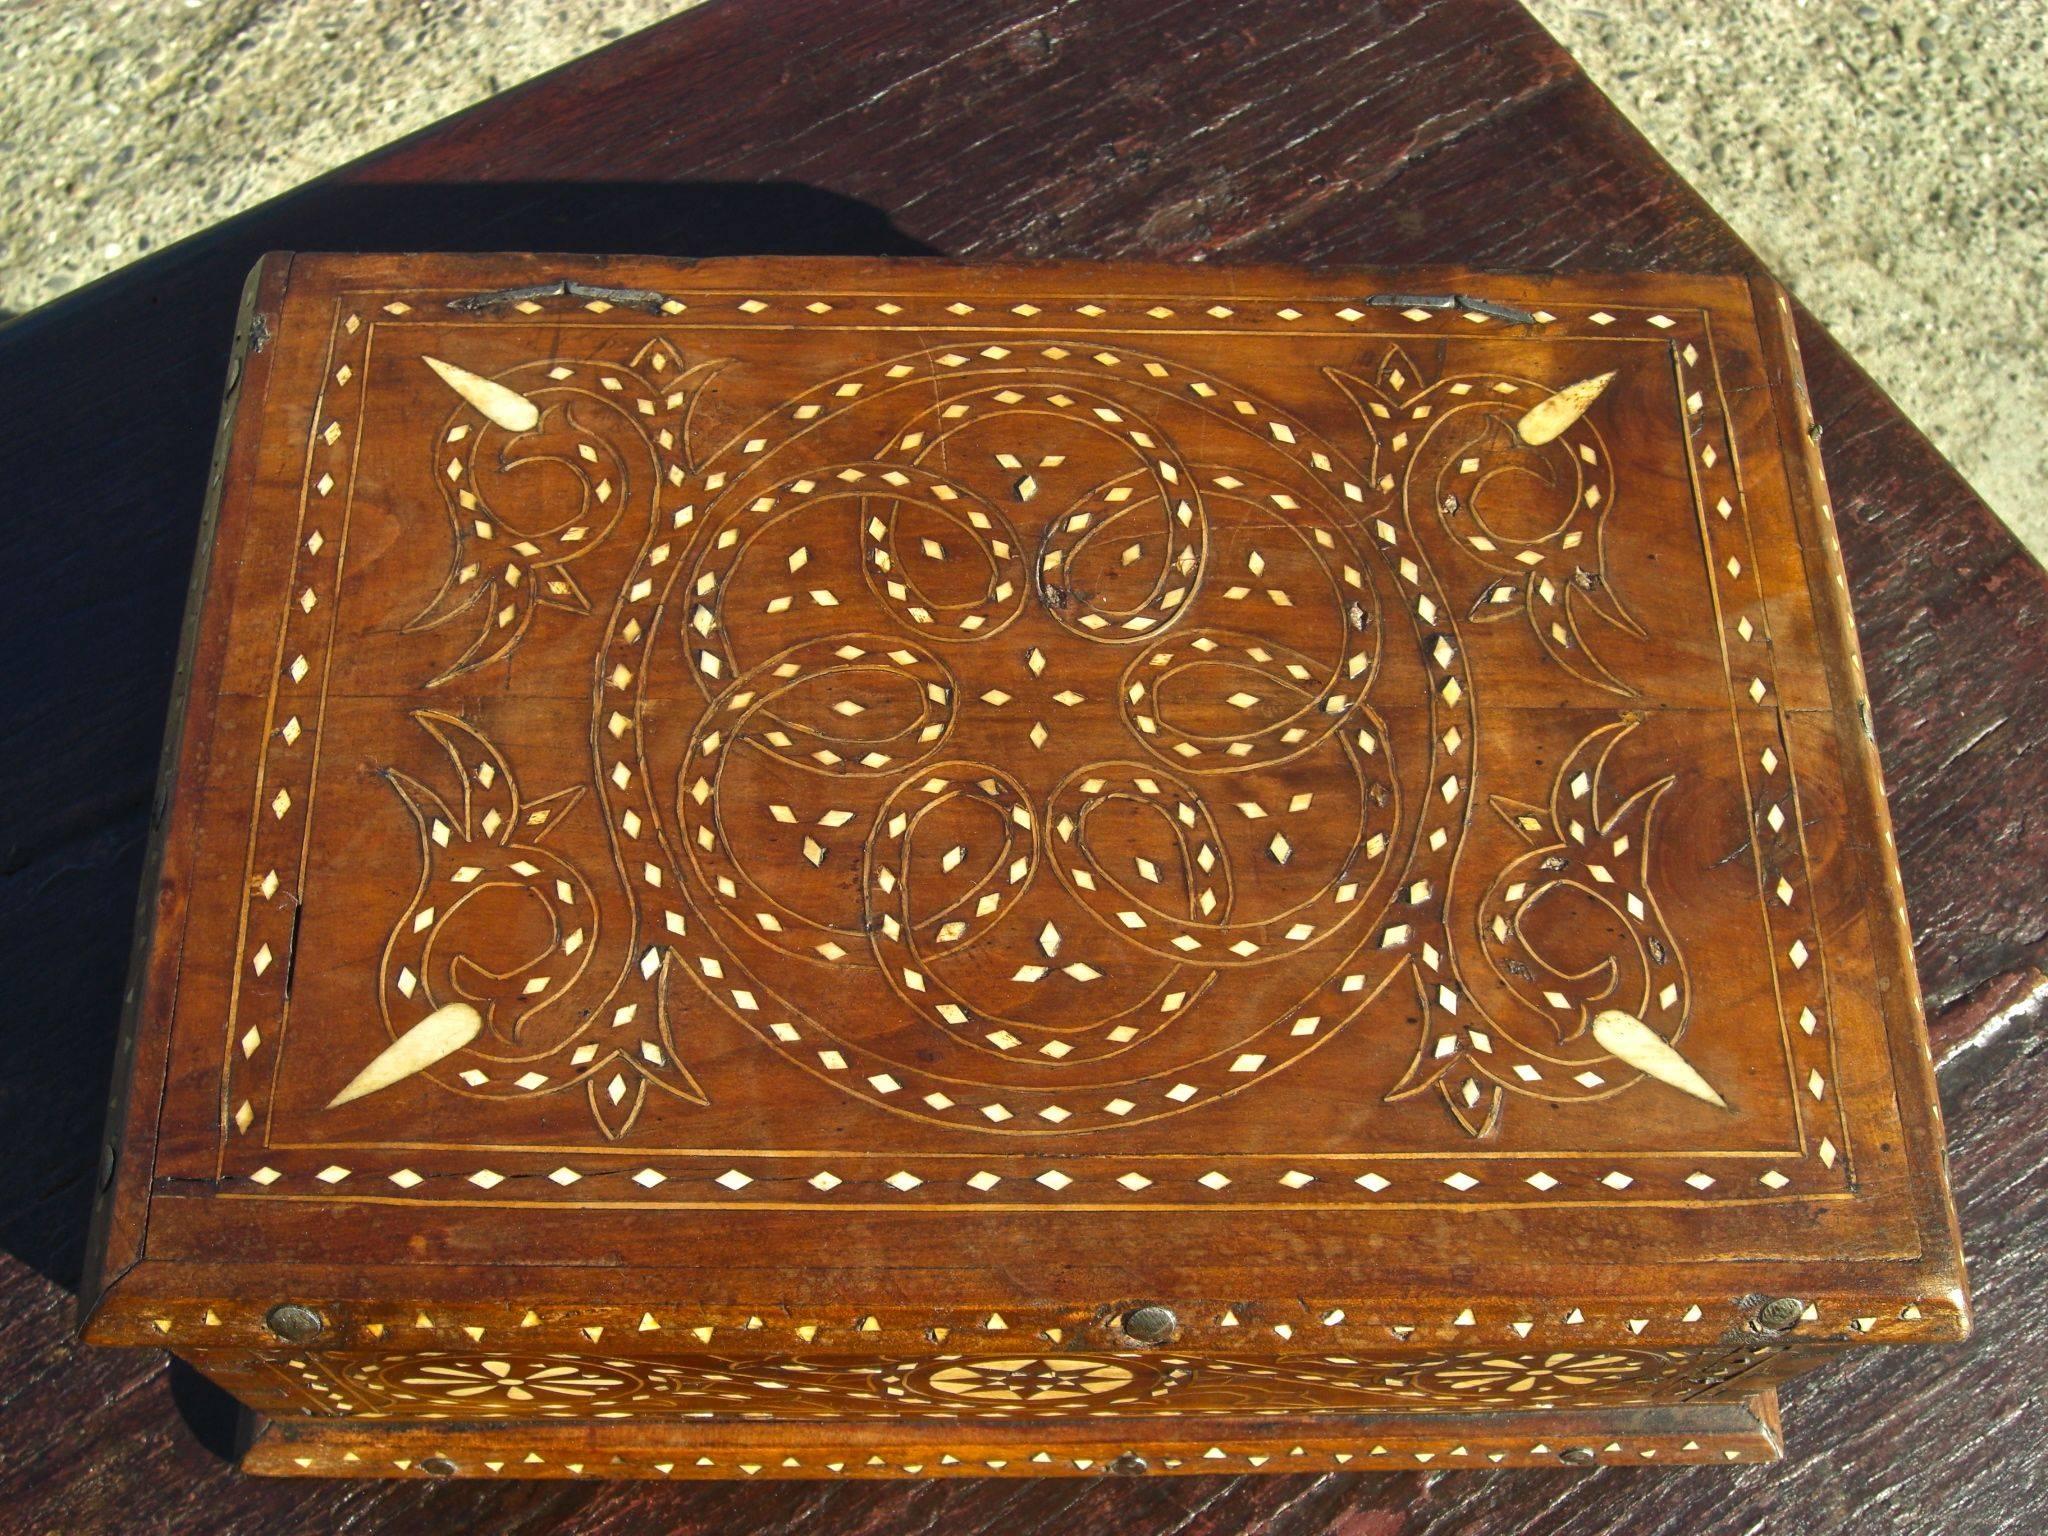 From the region of Aragon in north-central Spain, this mid-19th century walnut and chestnut tabletop box retains its original patina throughout, and beautifully executed arabesque and star designs of bone inlay on top, front and